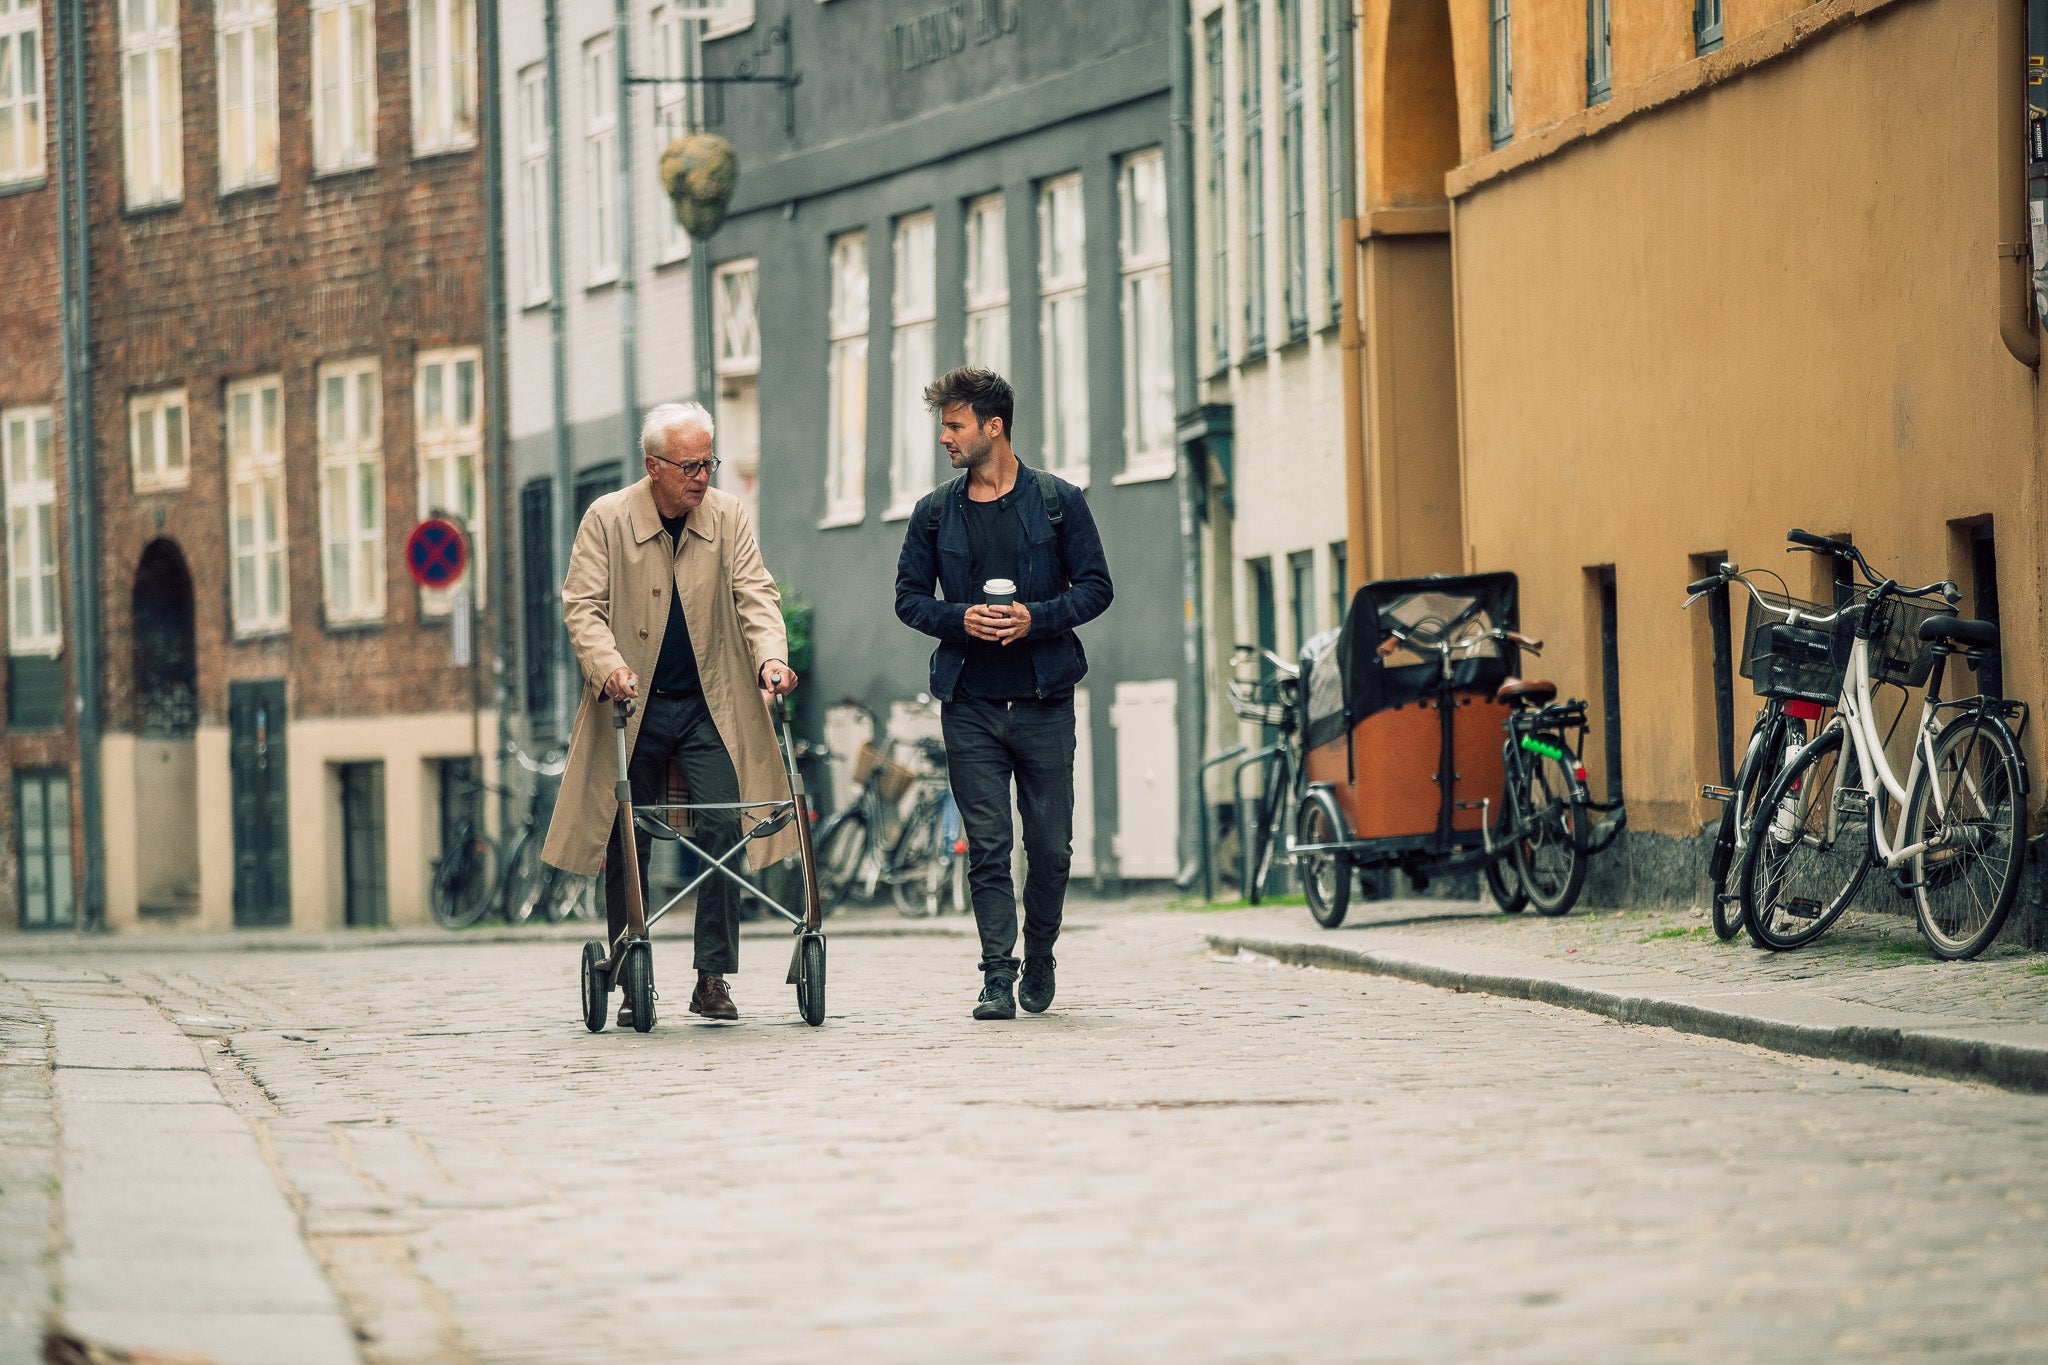 A grandfather walks with a modern lightweight walking frame along a cobble stone street, while talking to his adult grandson who walks beside him and holds a takeaway coffee. Bikes and European apartments are in the background.